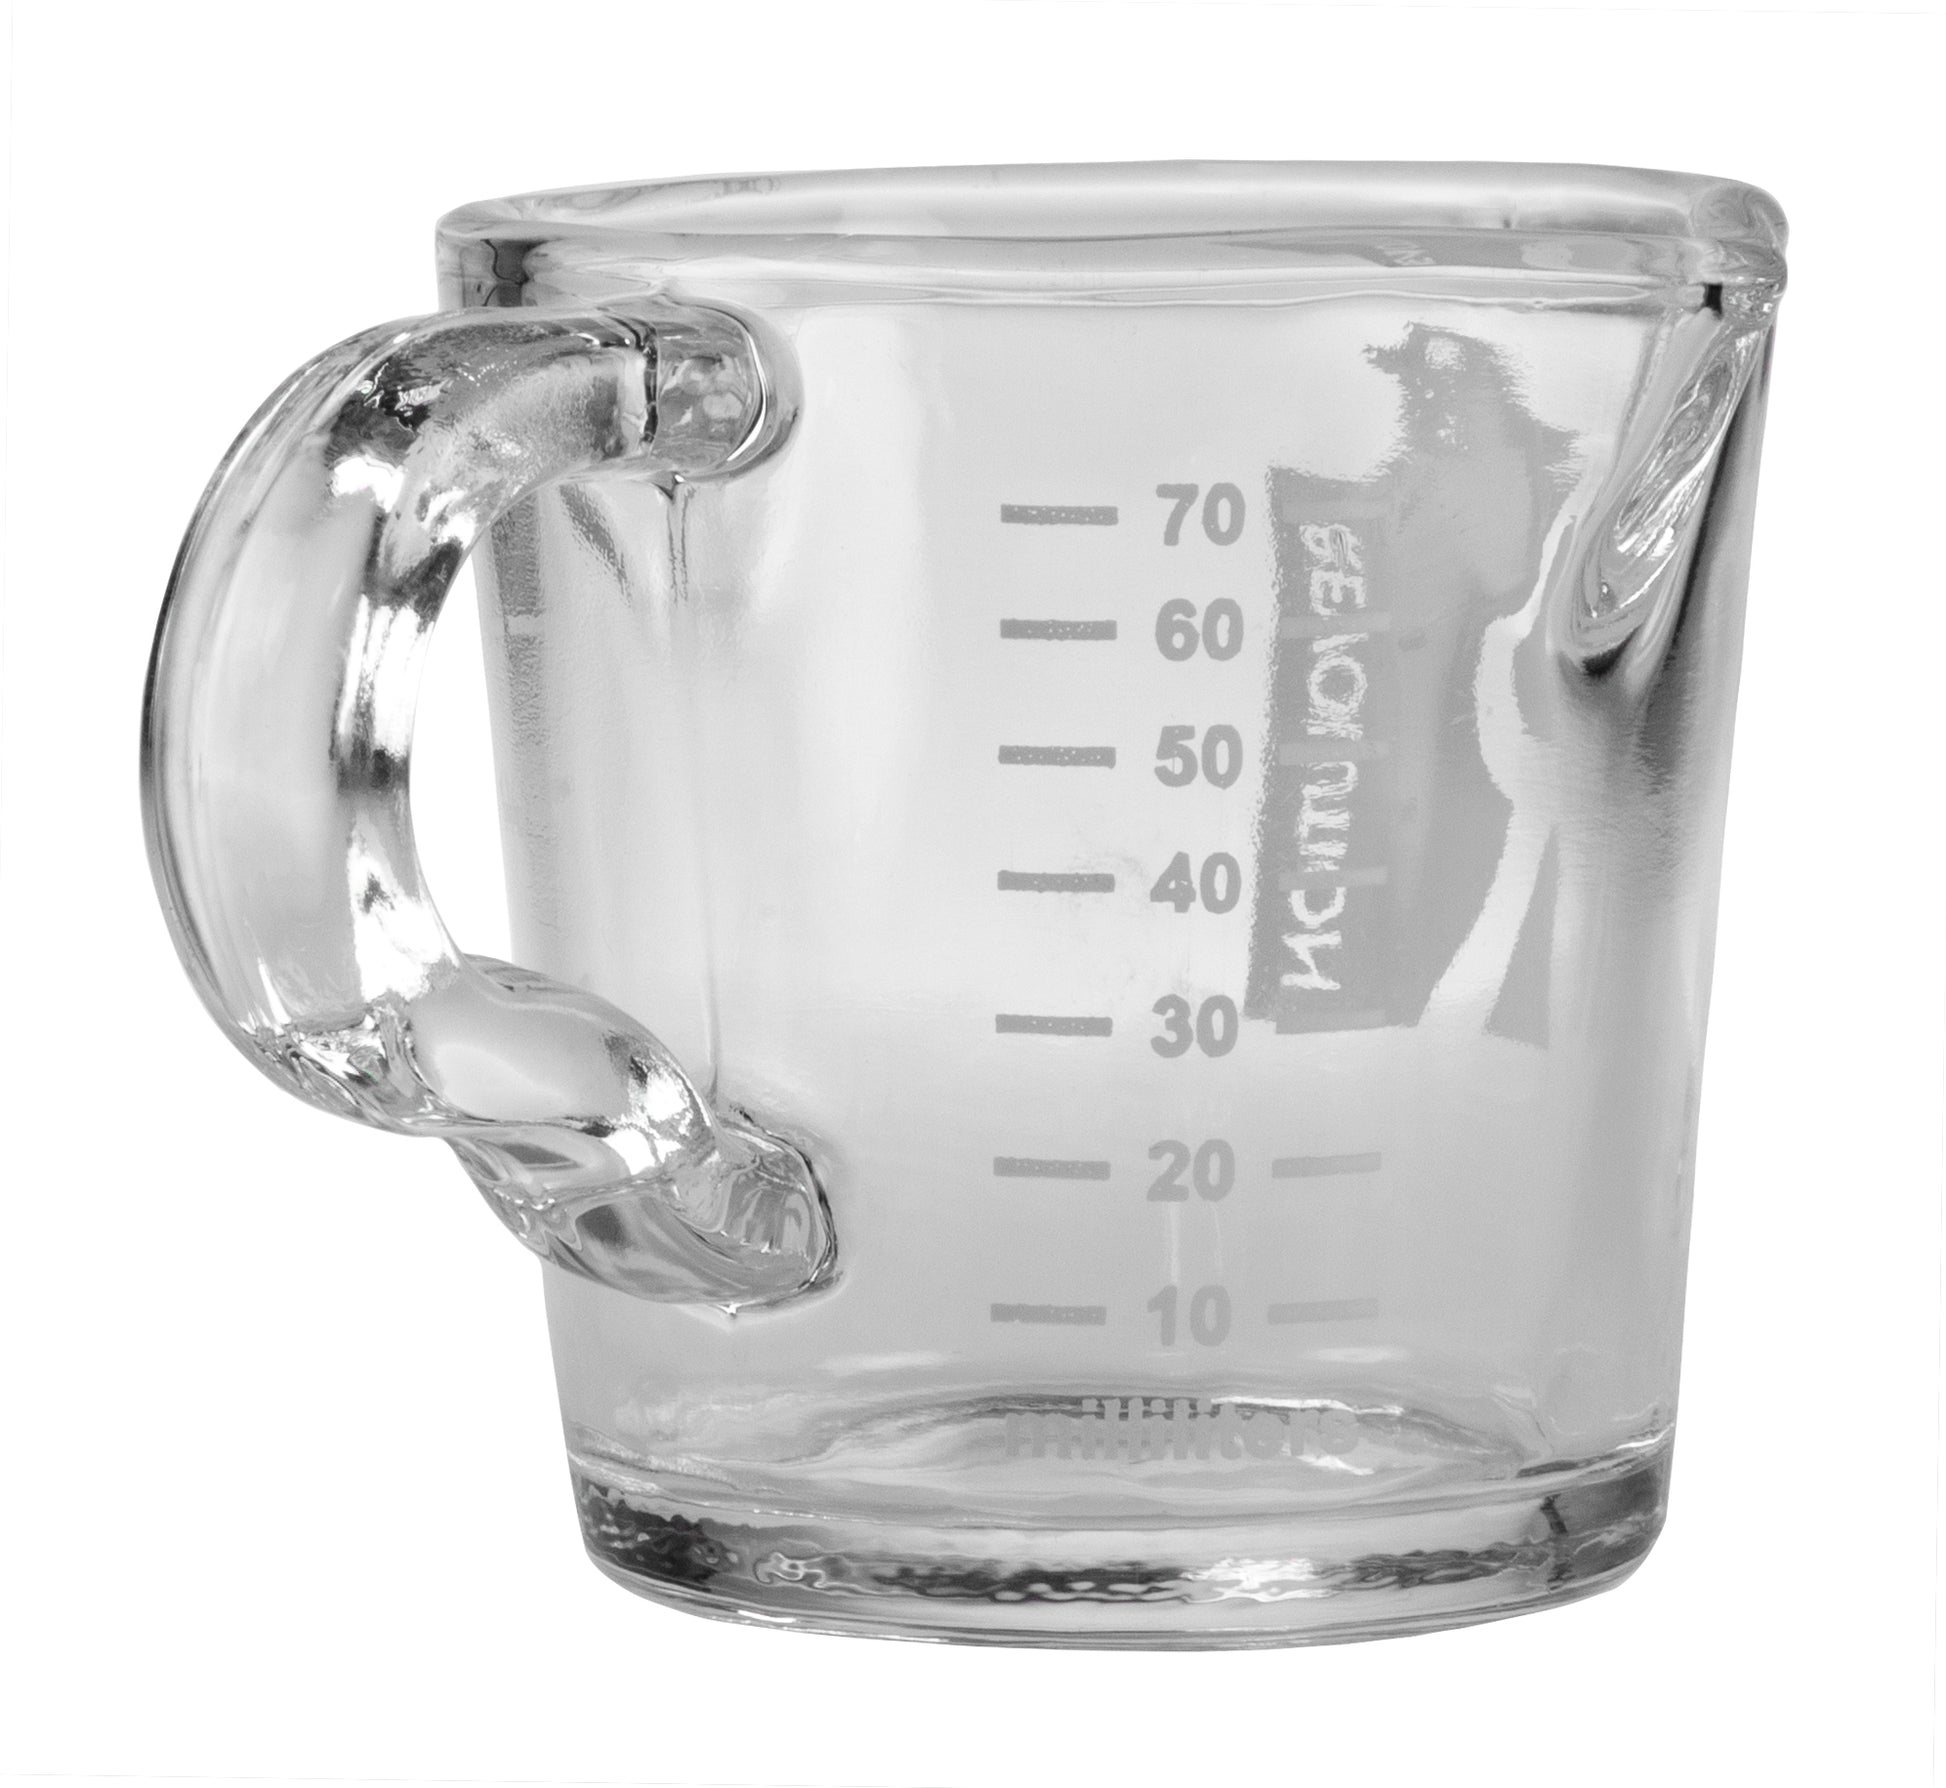 Espresso Shot Glass Measuring Cup with Double Spouts and Heat